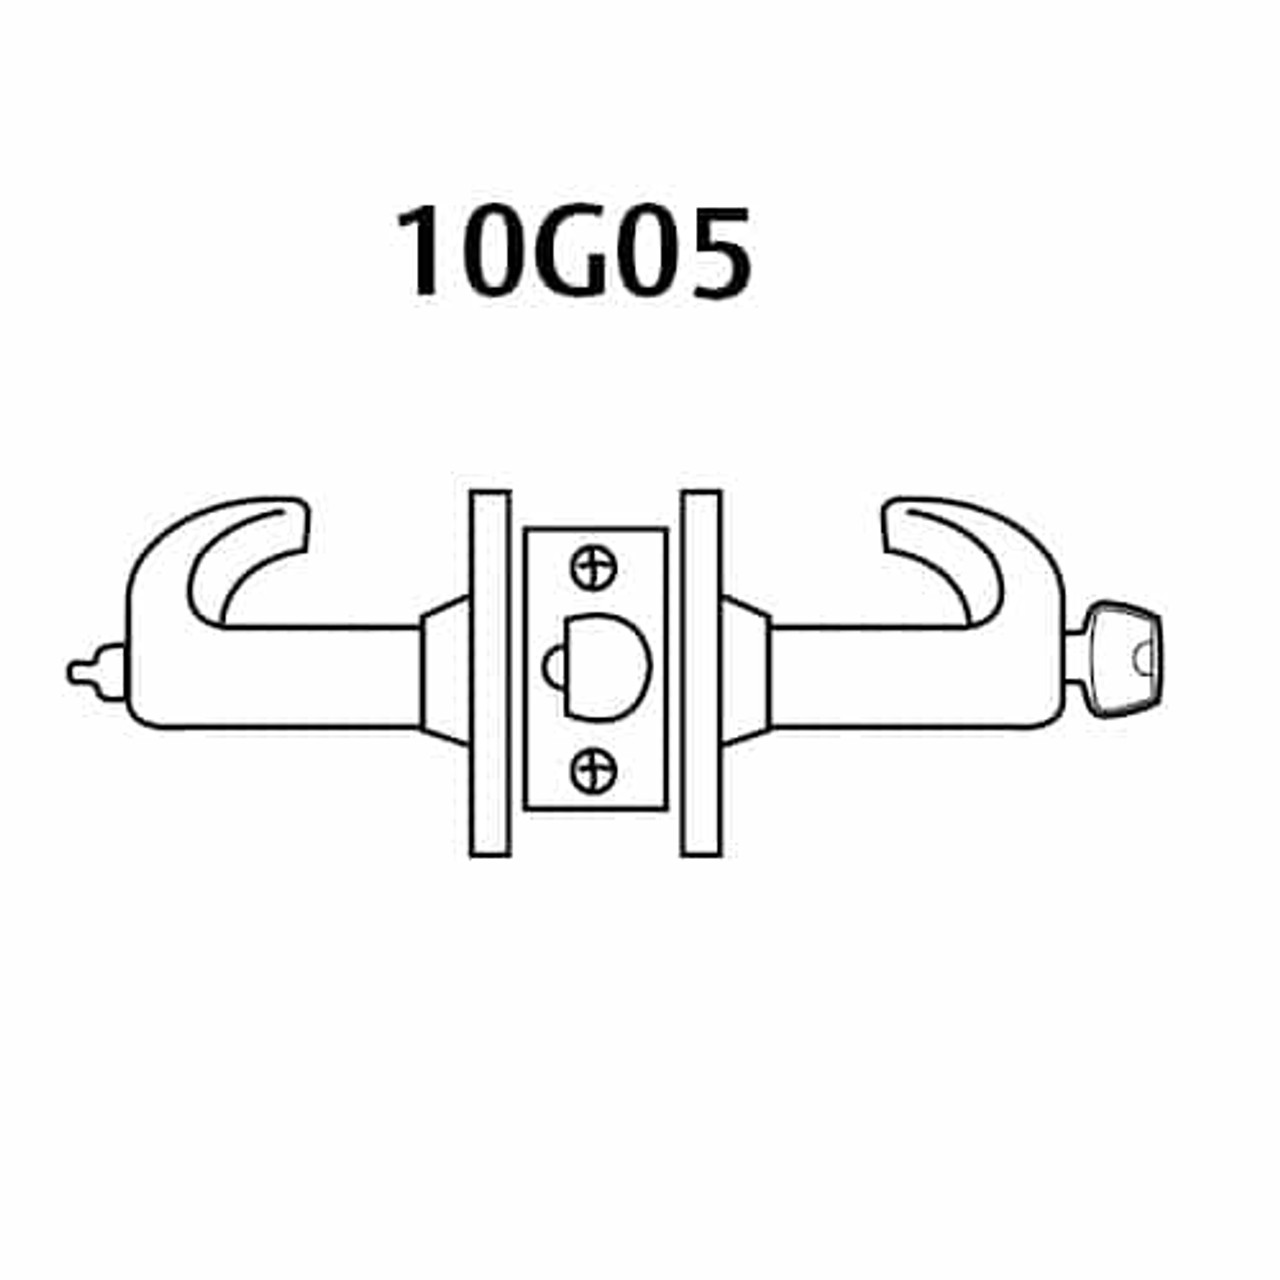 2860-10G05-LB-26 Sargent 10 Line Cylindrical Entry/Office Locks with B Lever Design and L Rose Prepped for LFIC in Bright Chrome